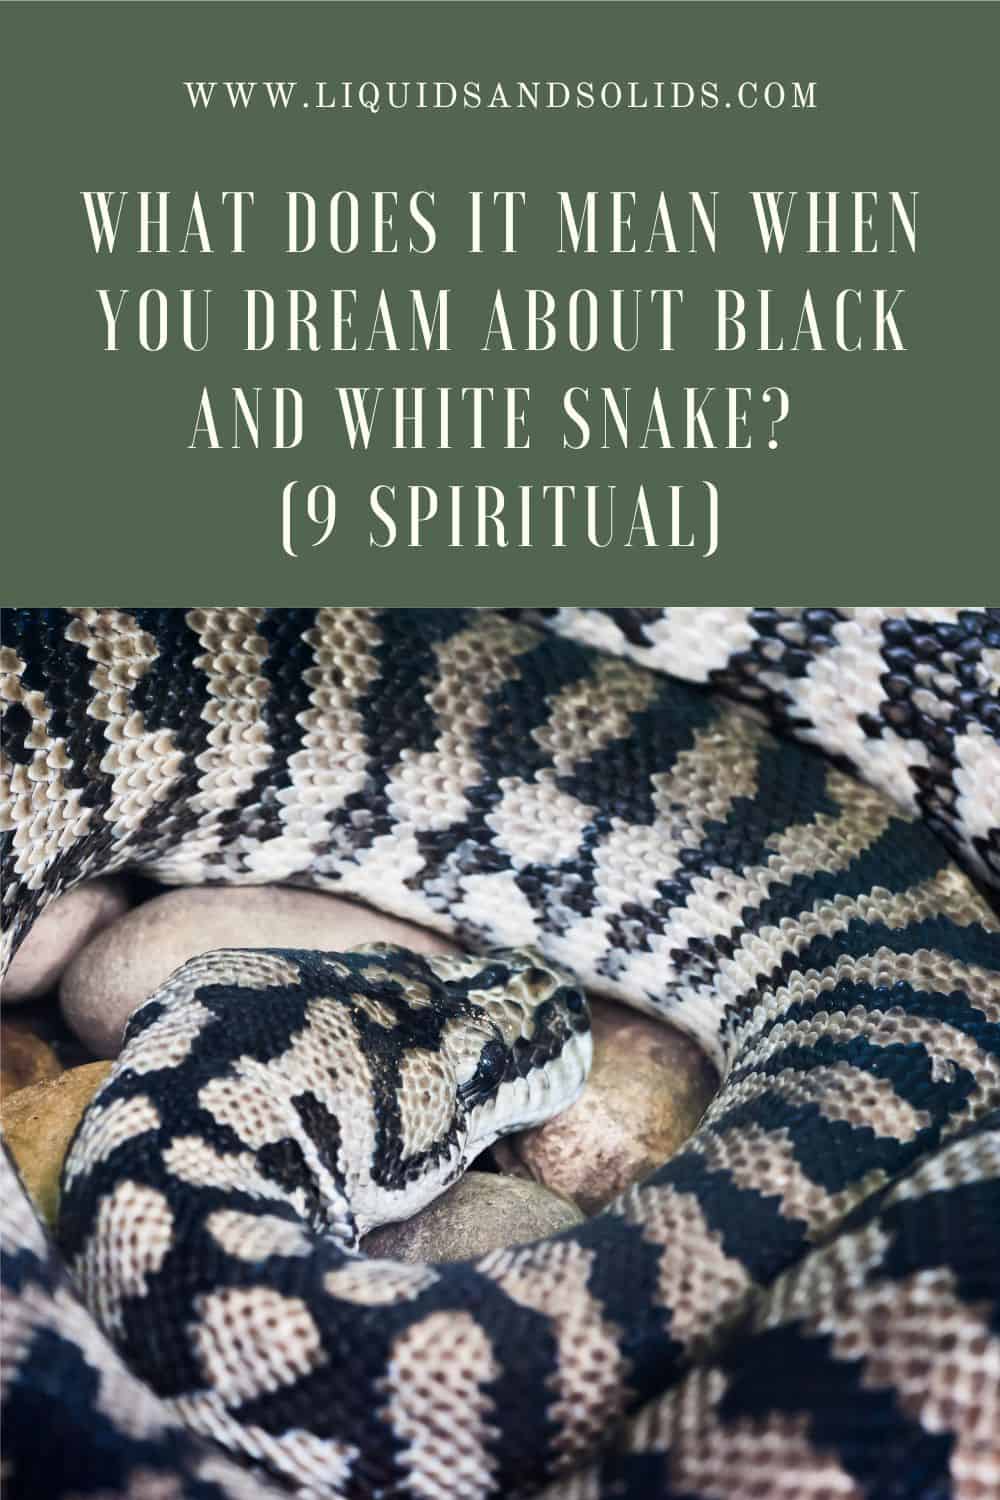 The Symbolism of Black and White Snake